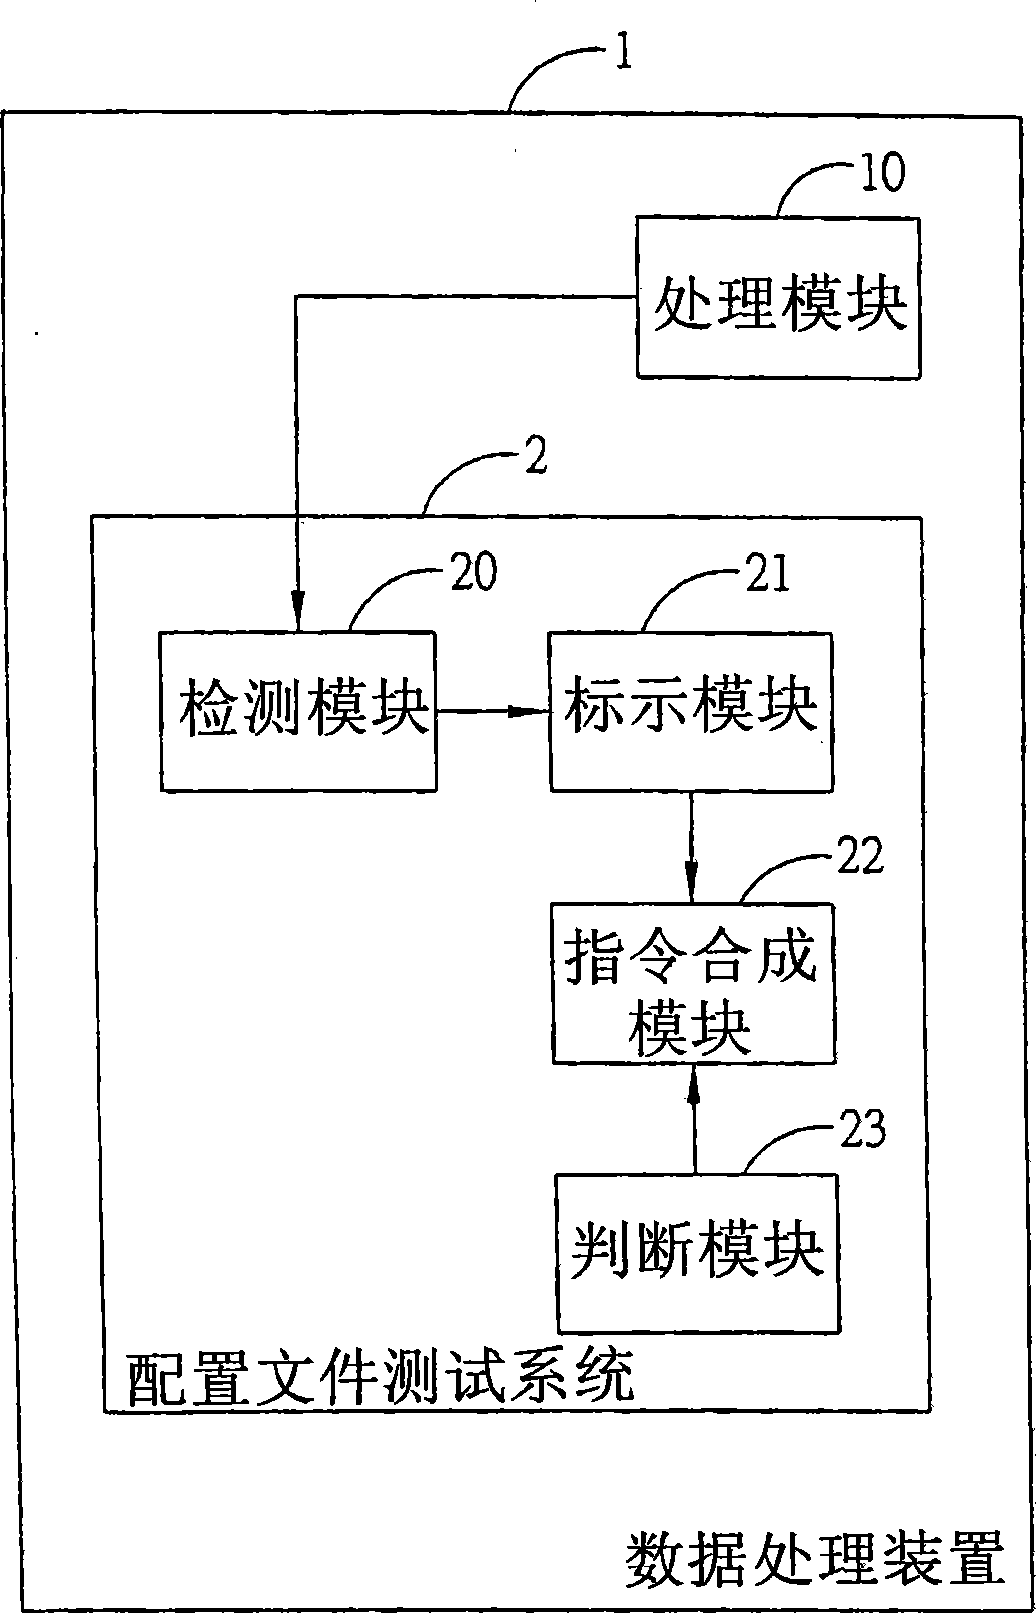 Configuration file testing system and method